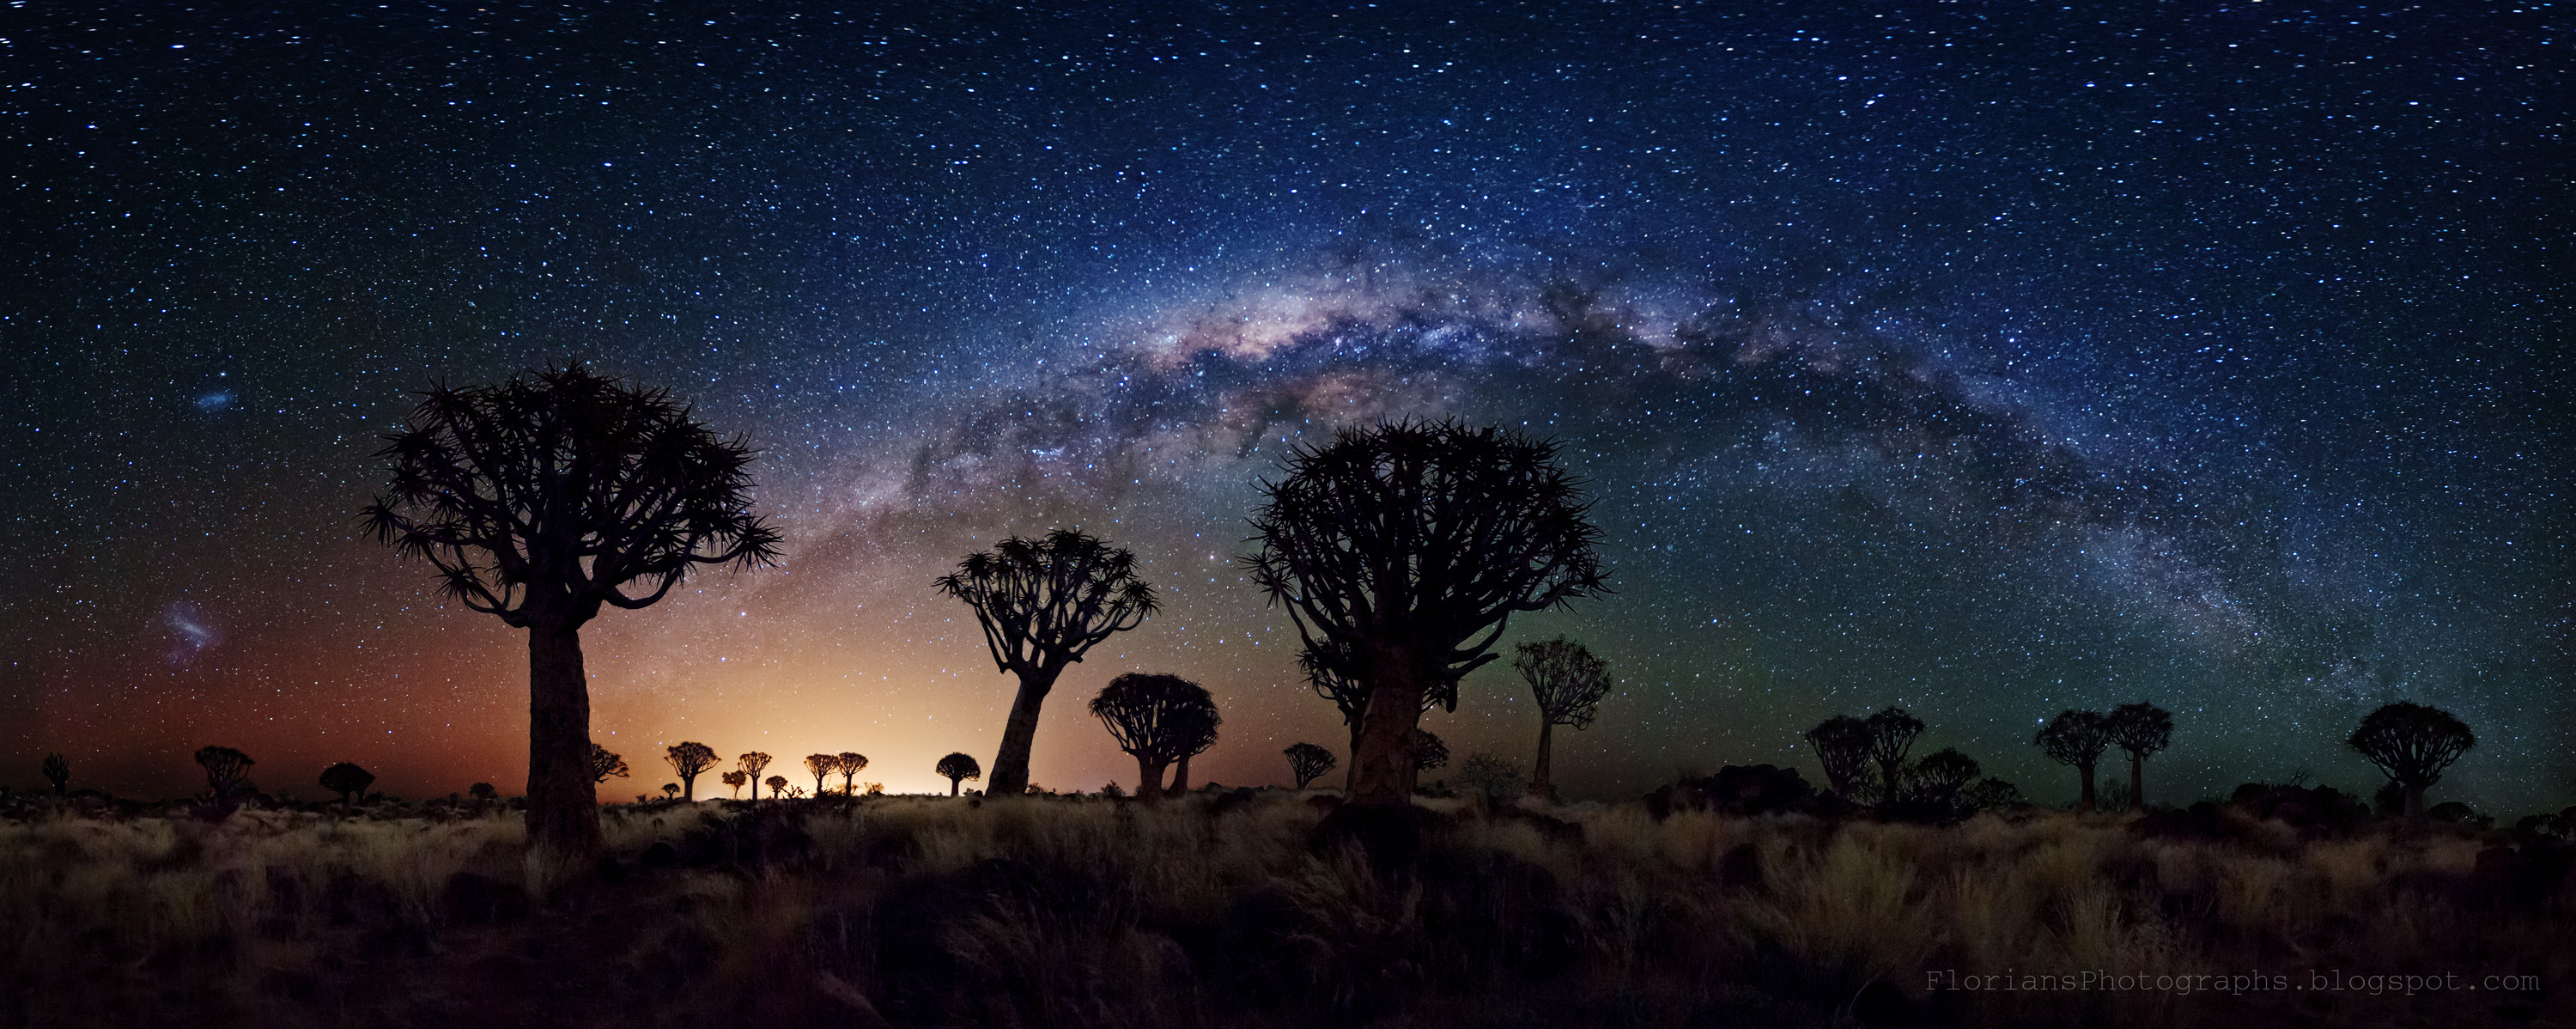 Milky Way Over Quiver Trees Widescreen